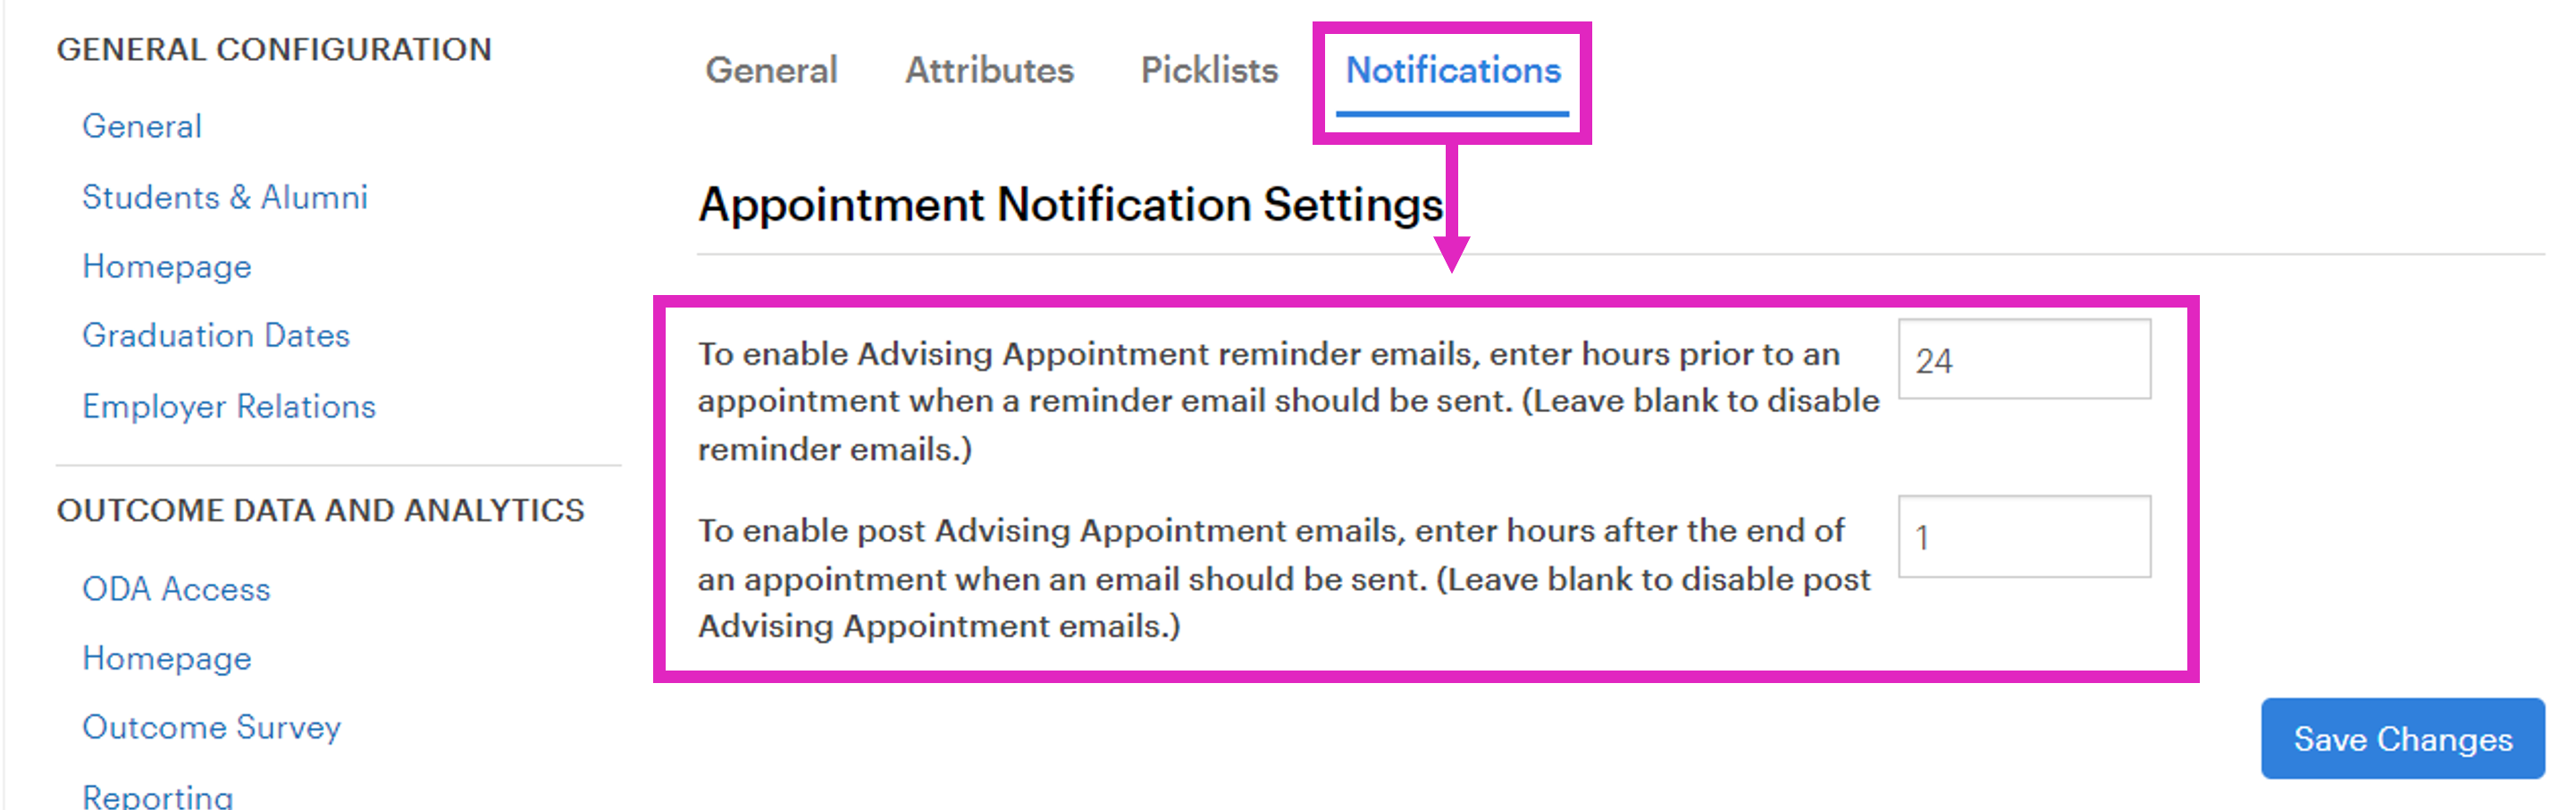 Appointment_Notification_Settings_-_Follow_Up_and_Reminder.png